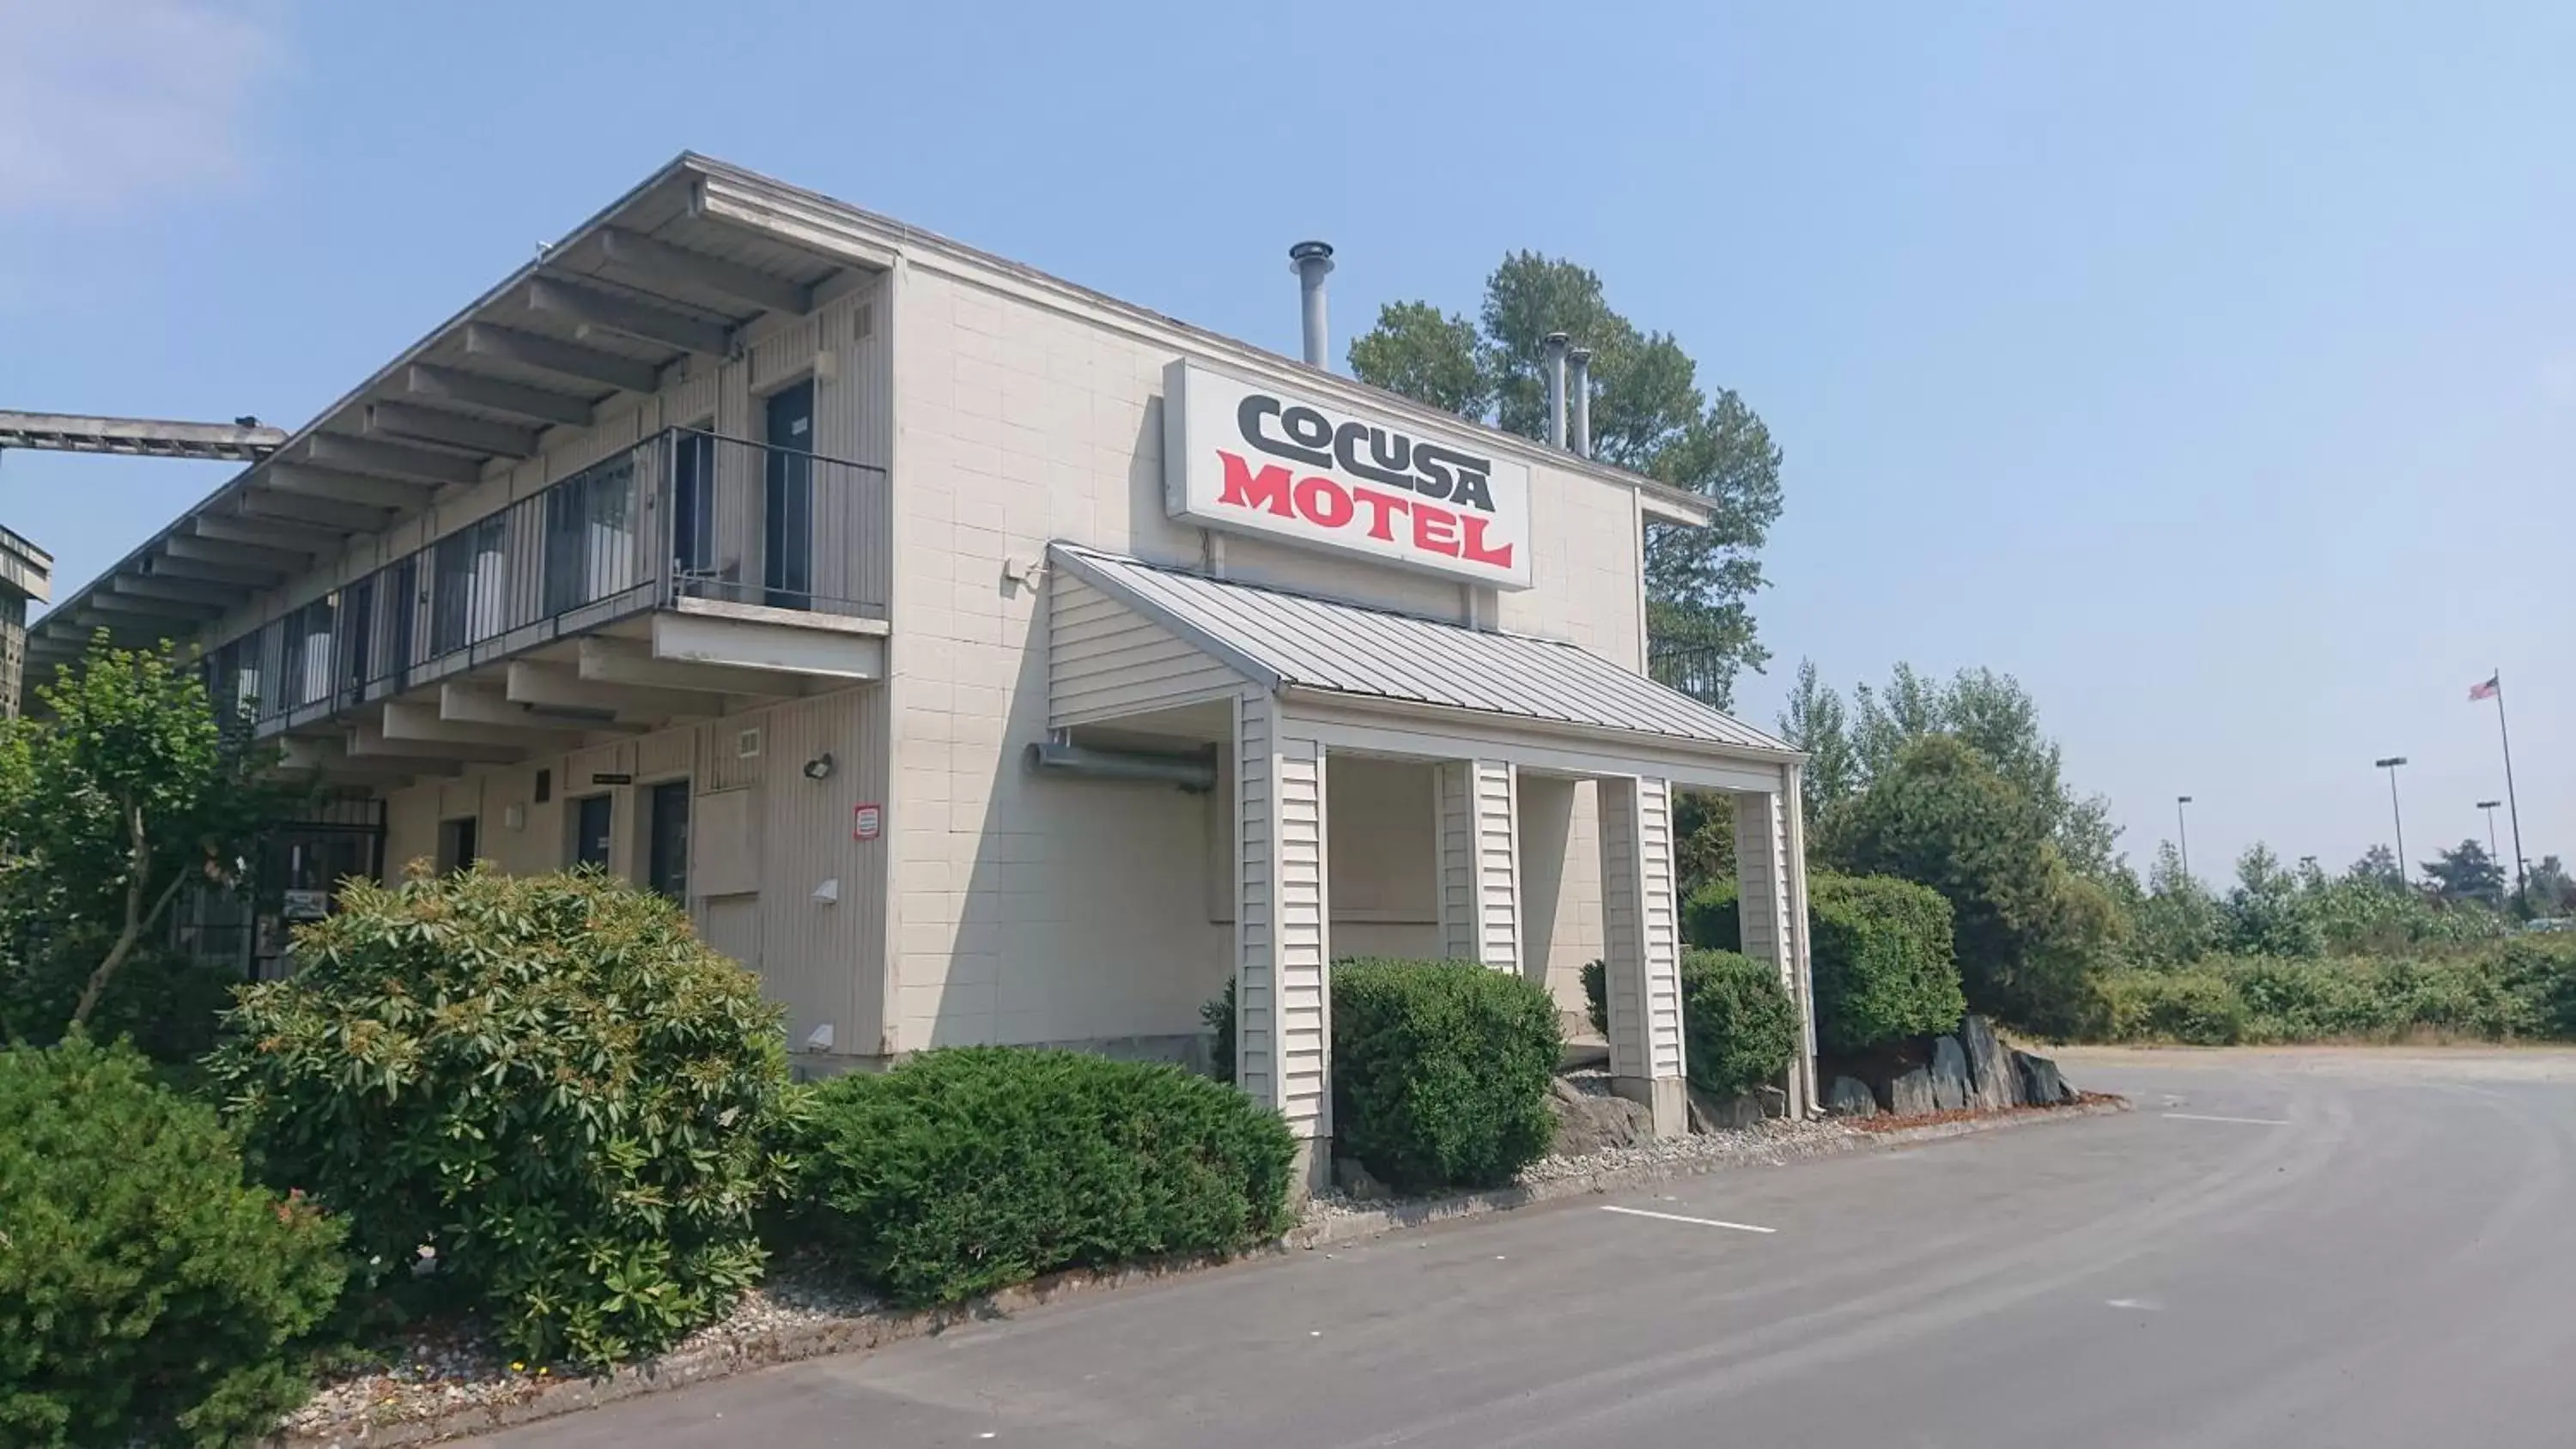 Property building in Cocusa Motel